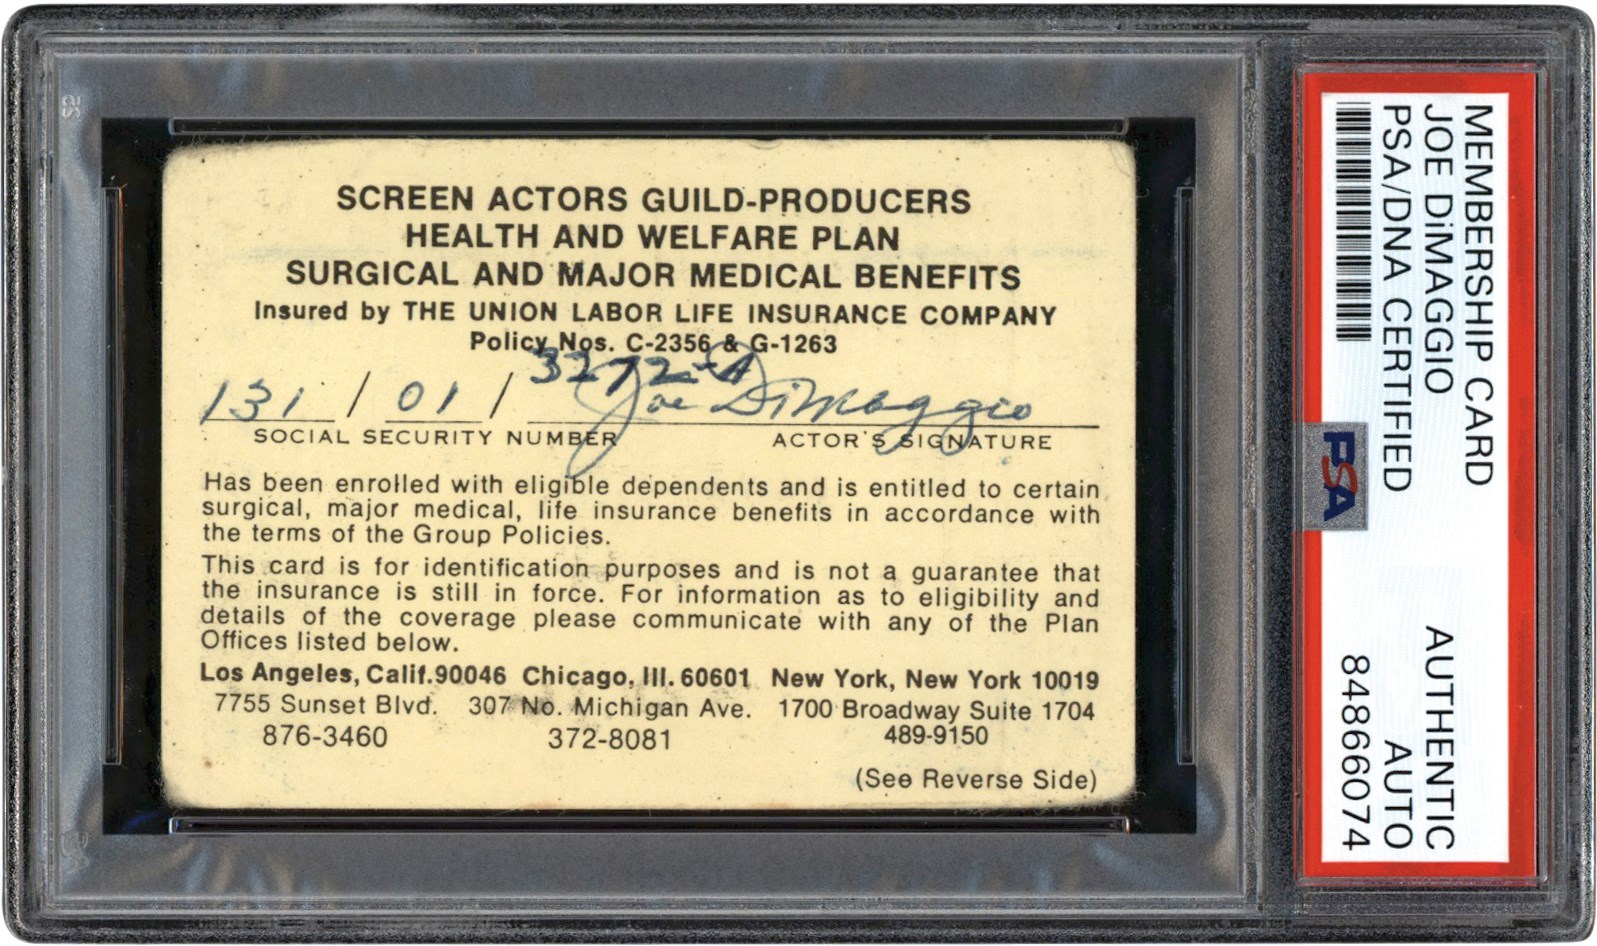 - Joe DiMaggio Signed Personally Owned Screen Actor's Guild Card from The Joe DiMaggio Collection (PSA & Family LOA)